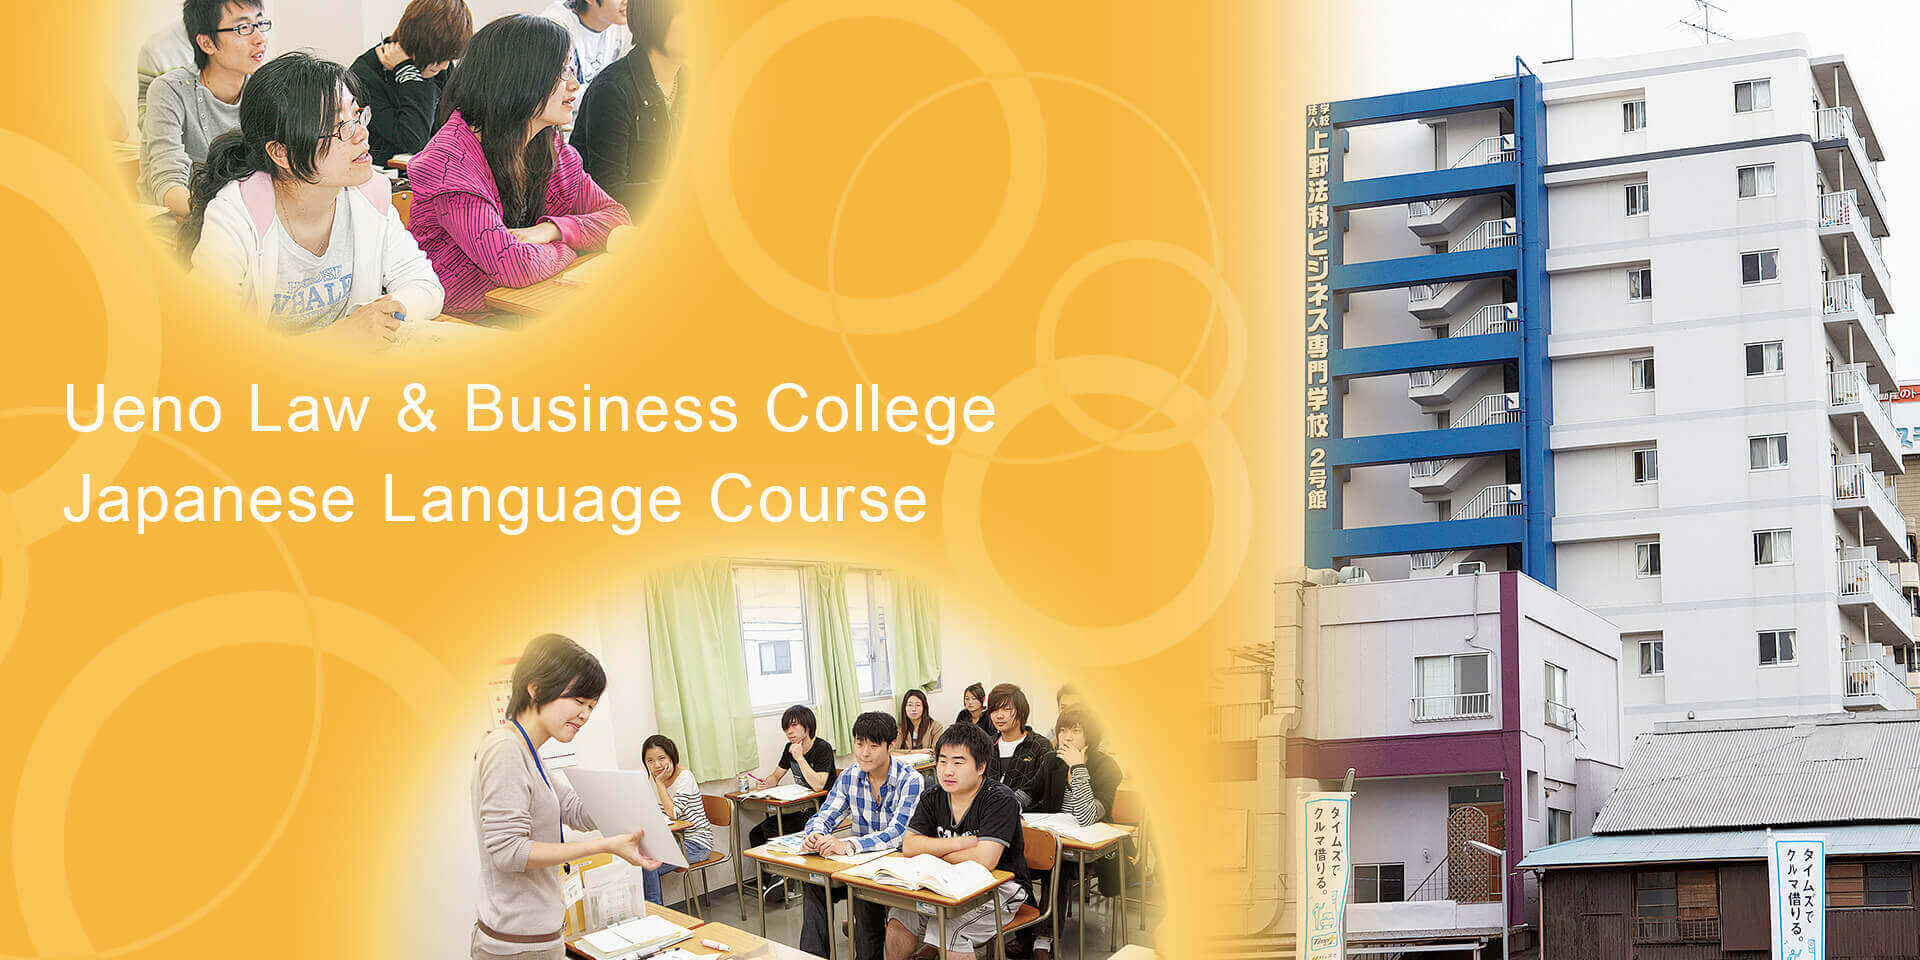 Ueno Law & Business College Japanese Language Course